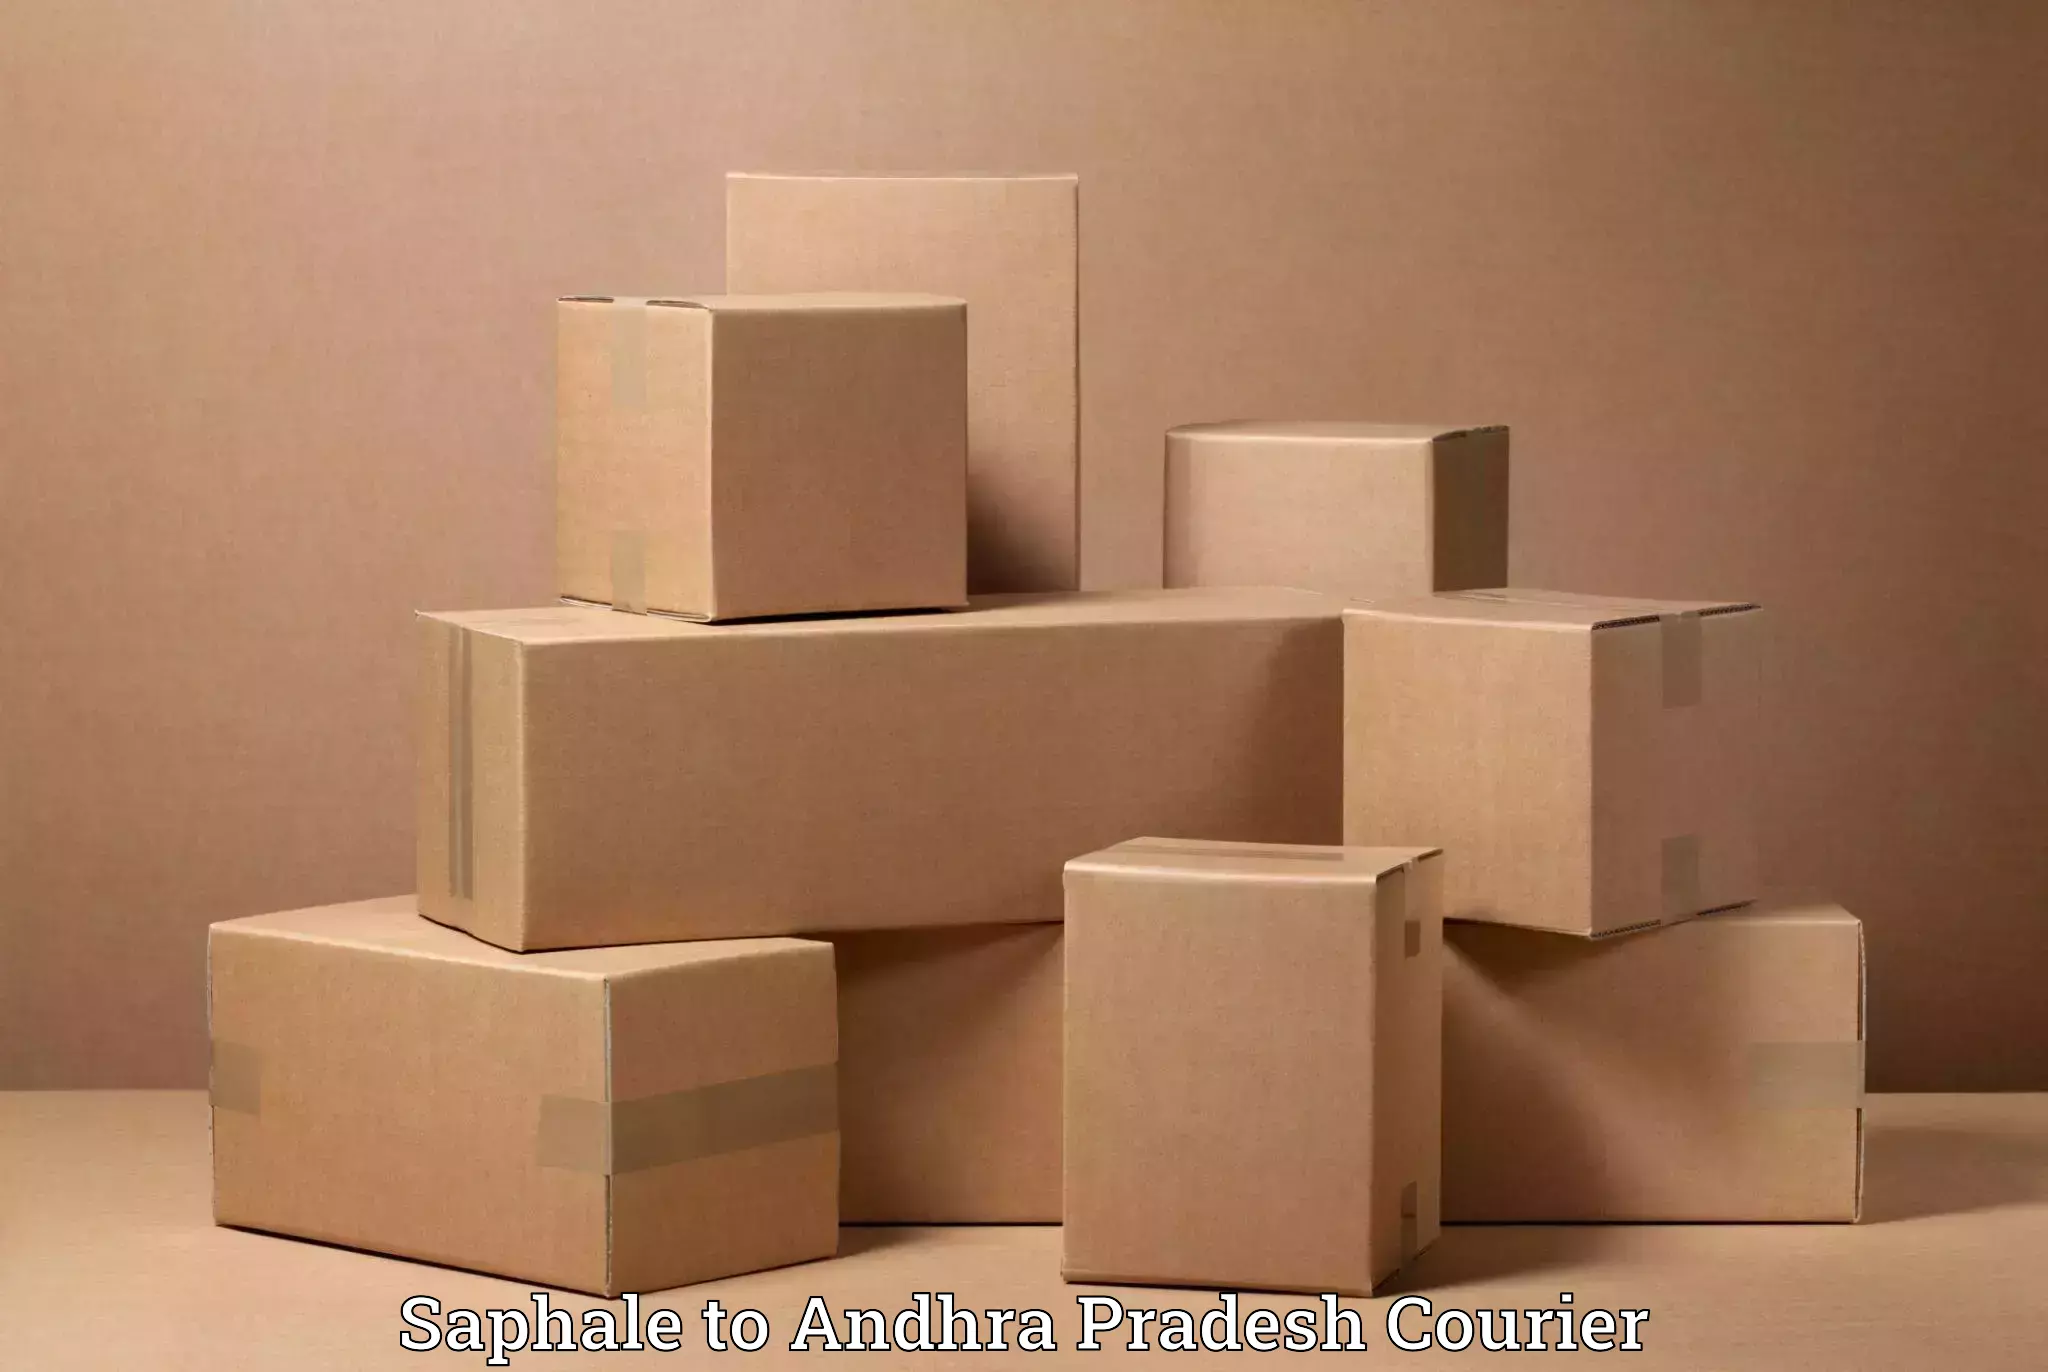 Professional relocation services Saphale to Tripuranthakam